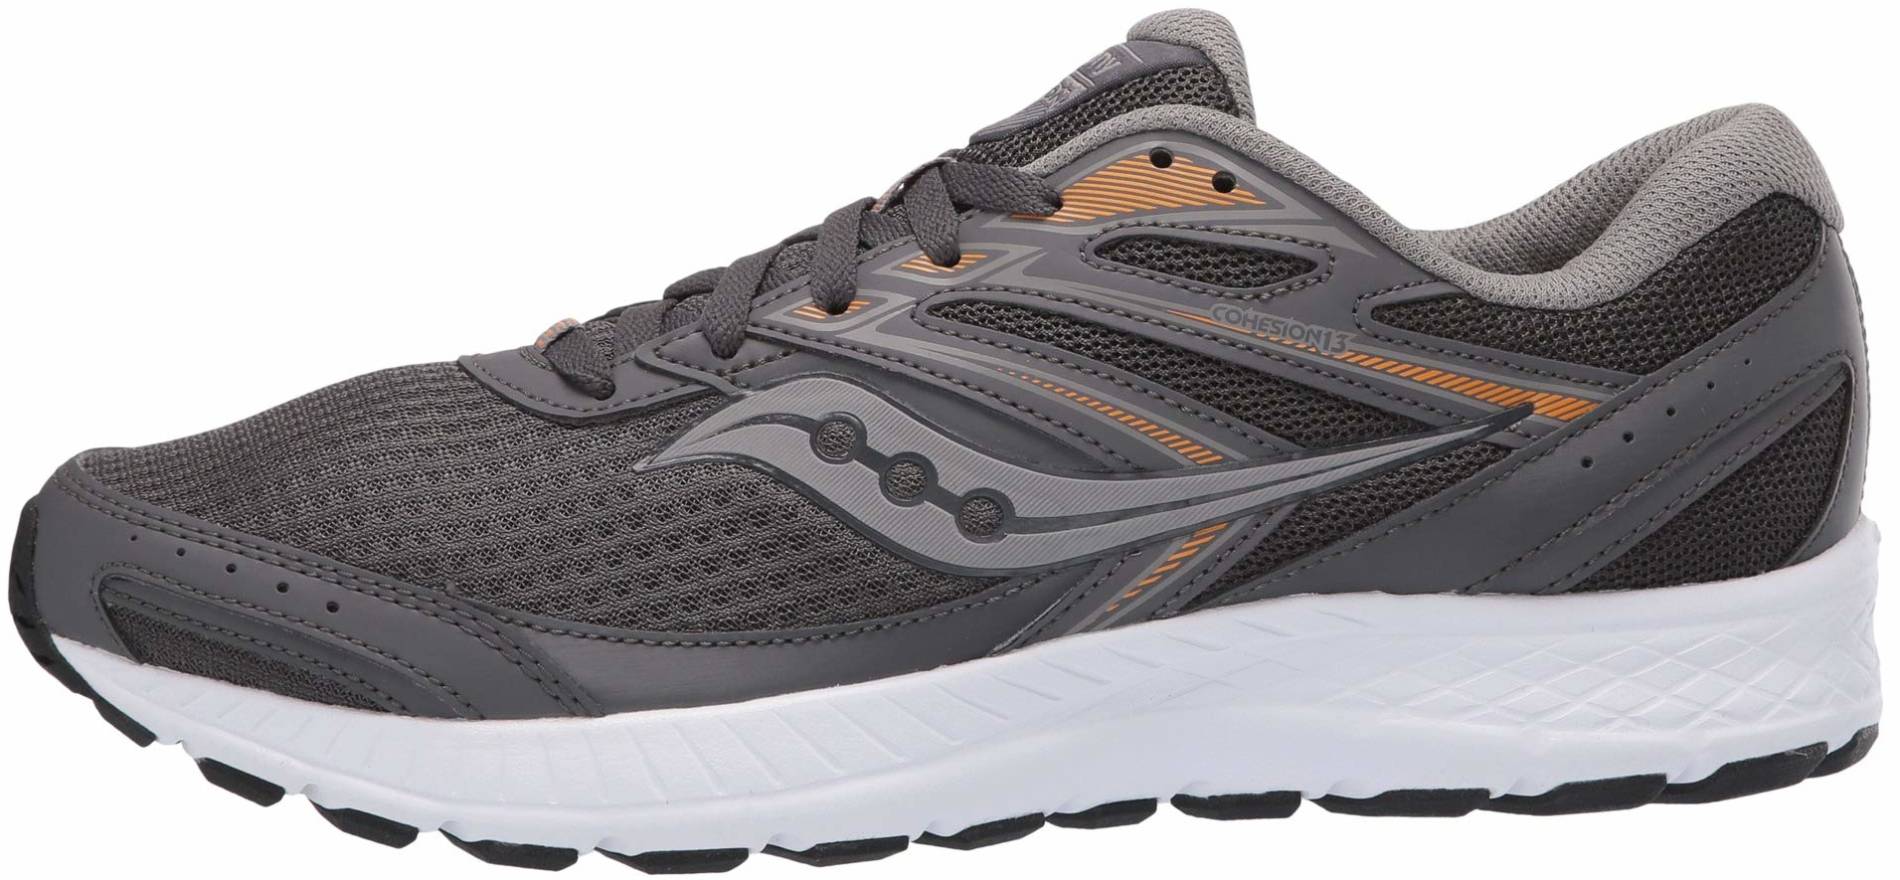 saucony neutral running shoes womens uk